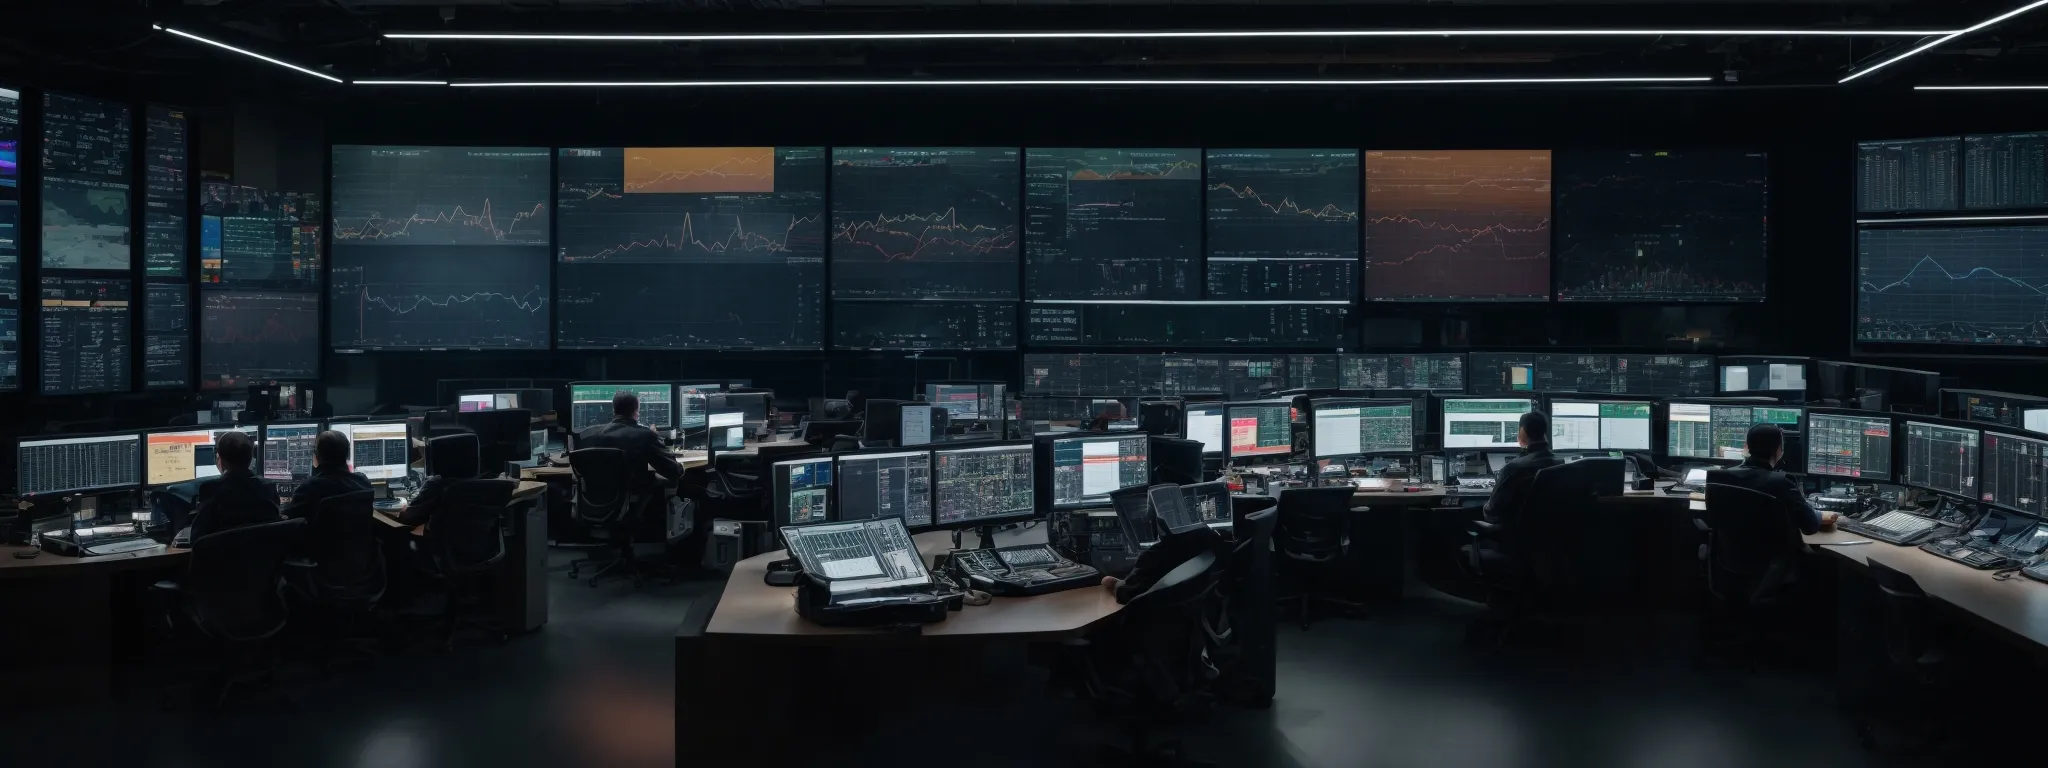 a modern, high-tech control room where operators monitor automated systems orchestrating digital marketing campaigns on large screens.